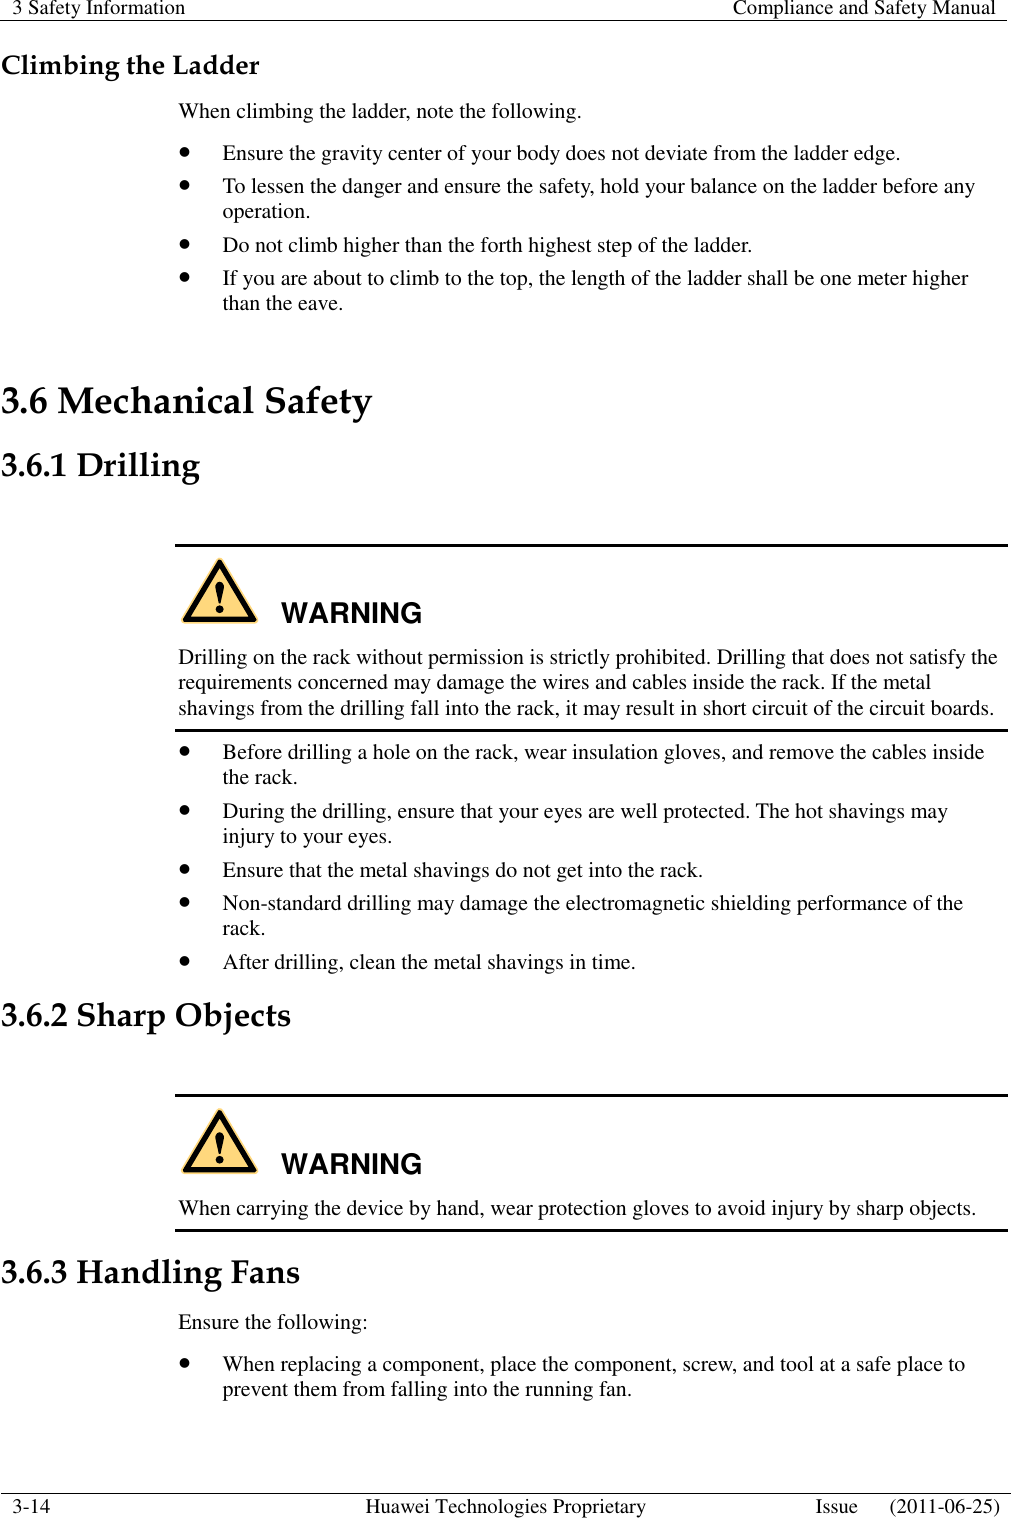 3 Safety Information    Compliance and Safety Manual  3-14 Huawei Technologies Proprietary Issue      (2011-06-25)  Climbing the Ladder When climbing the ladder, note the following.  Ensure the gravity center of your body does not deviate from the ladder edge.  To lessen the danger and ensure the safety, hold your balance on the ladder before any operation.  Do not climb higher than the forth highest step of the ladder.  If you are about to climb to the top, the length of the ladder shall be one meter higher than the eave. 3.6 Mechanical Safety 3.6.1 Drilling  WARNING Drilling on the rack without permission is strictly prohibited. Drilling that does not satisfy the requirements concerned may damage the wires and cables inside the rack. If the metal shavings from the drilling fall into the rack, it may result in short circuit of the circuit boards.  Before drilling a hole on the rack, wear insulation gloves, and remove the cables inside the rack.  During the drilling, ensure that your eyes are well protected. The hot shavings may injury to your eyes.  Ensure that the metal shavings do not get into the rack.  Non-standard drilling may damage the electromagnetic shielding performance of the rack.  After drilling, clean the metal shavings in time. 3.6.2 Sharp Objects  WARNING When carrying the device by hand, wear protection gloves to avoid injury by sharp objects. 3.6.3 Handling Fans Ensure the following:  When replacing a component, place the component, screw, and tool at a safe place to prevent them from falling into the running fan. 